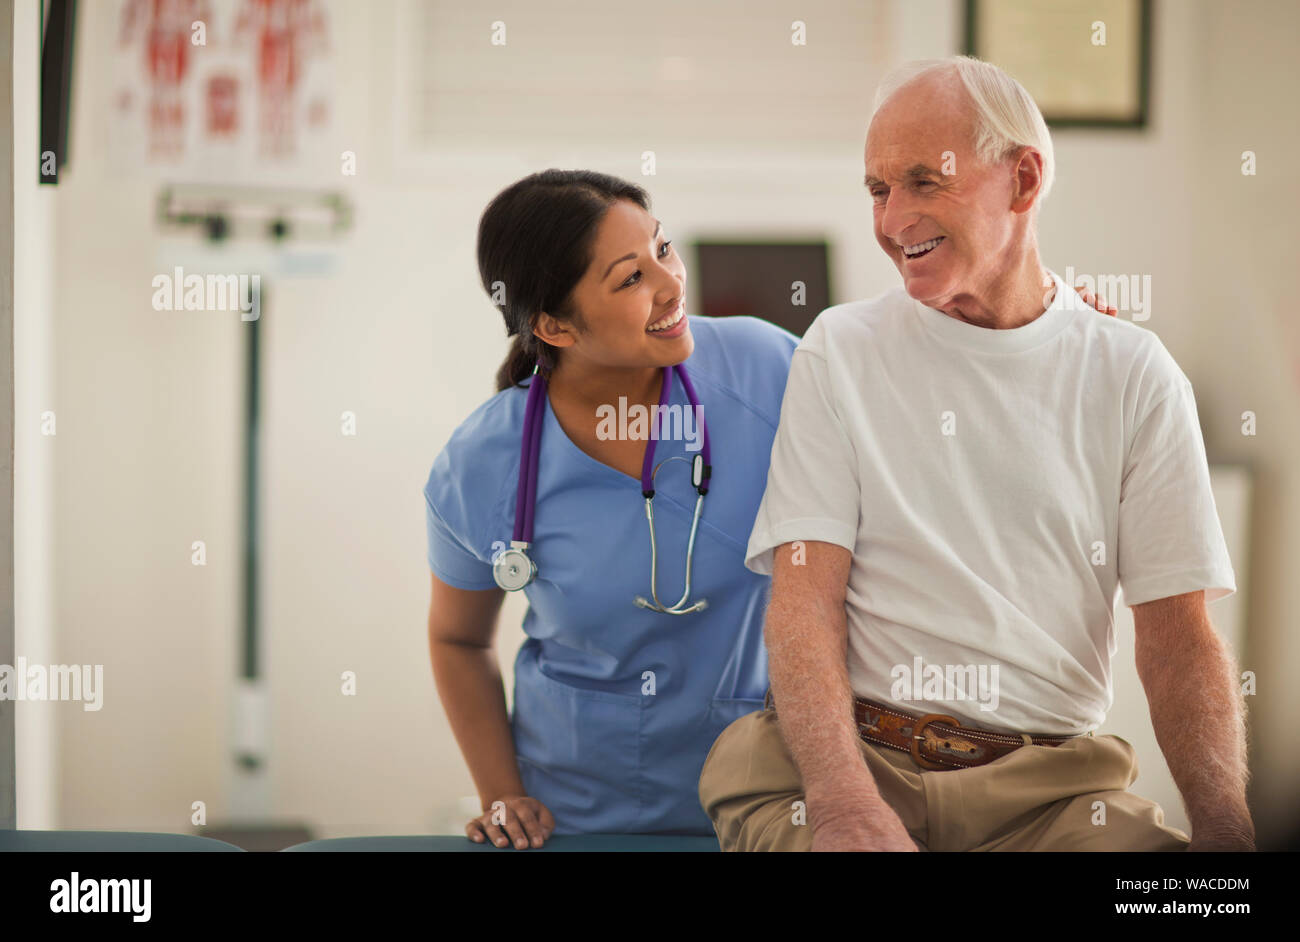 Smiling female nurse comforting an elderly male patient inside an exam room. Stock Photo